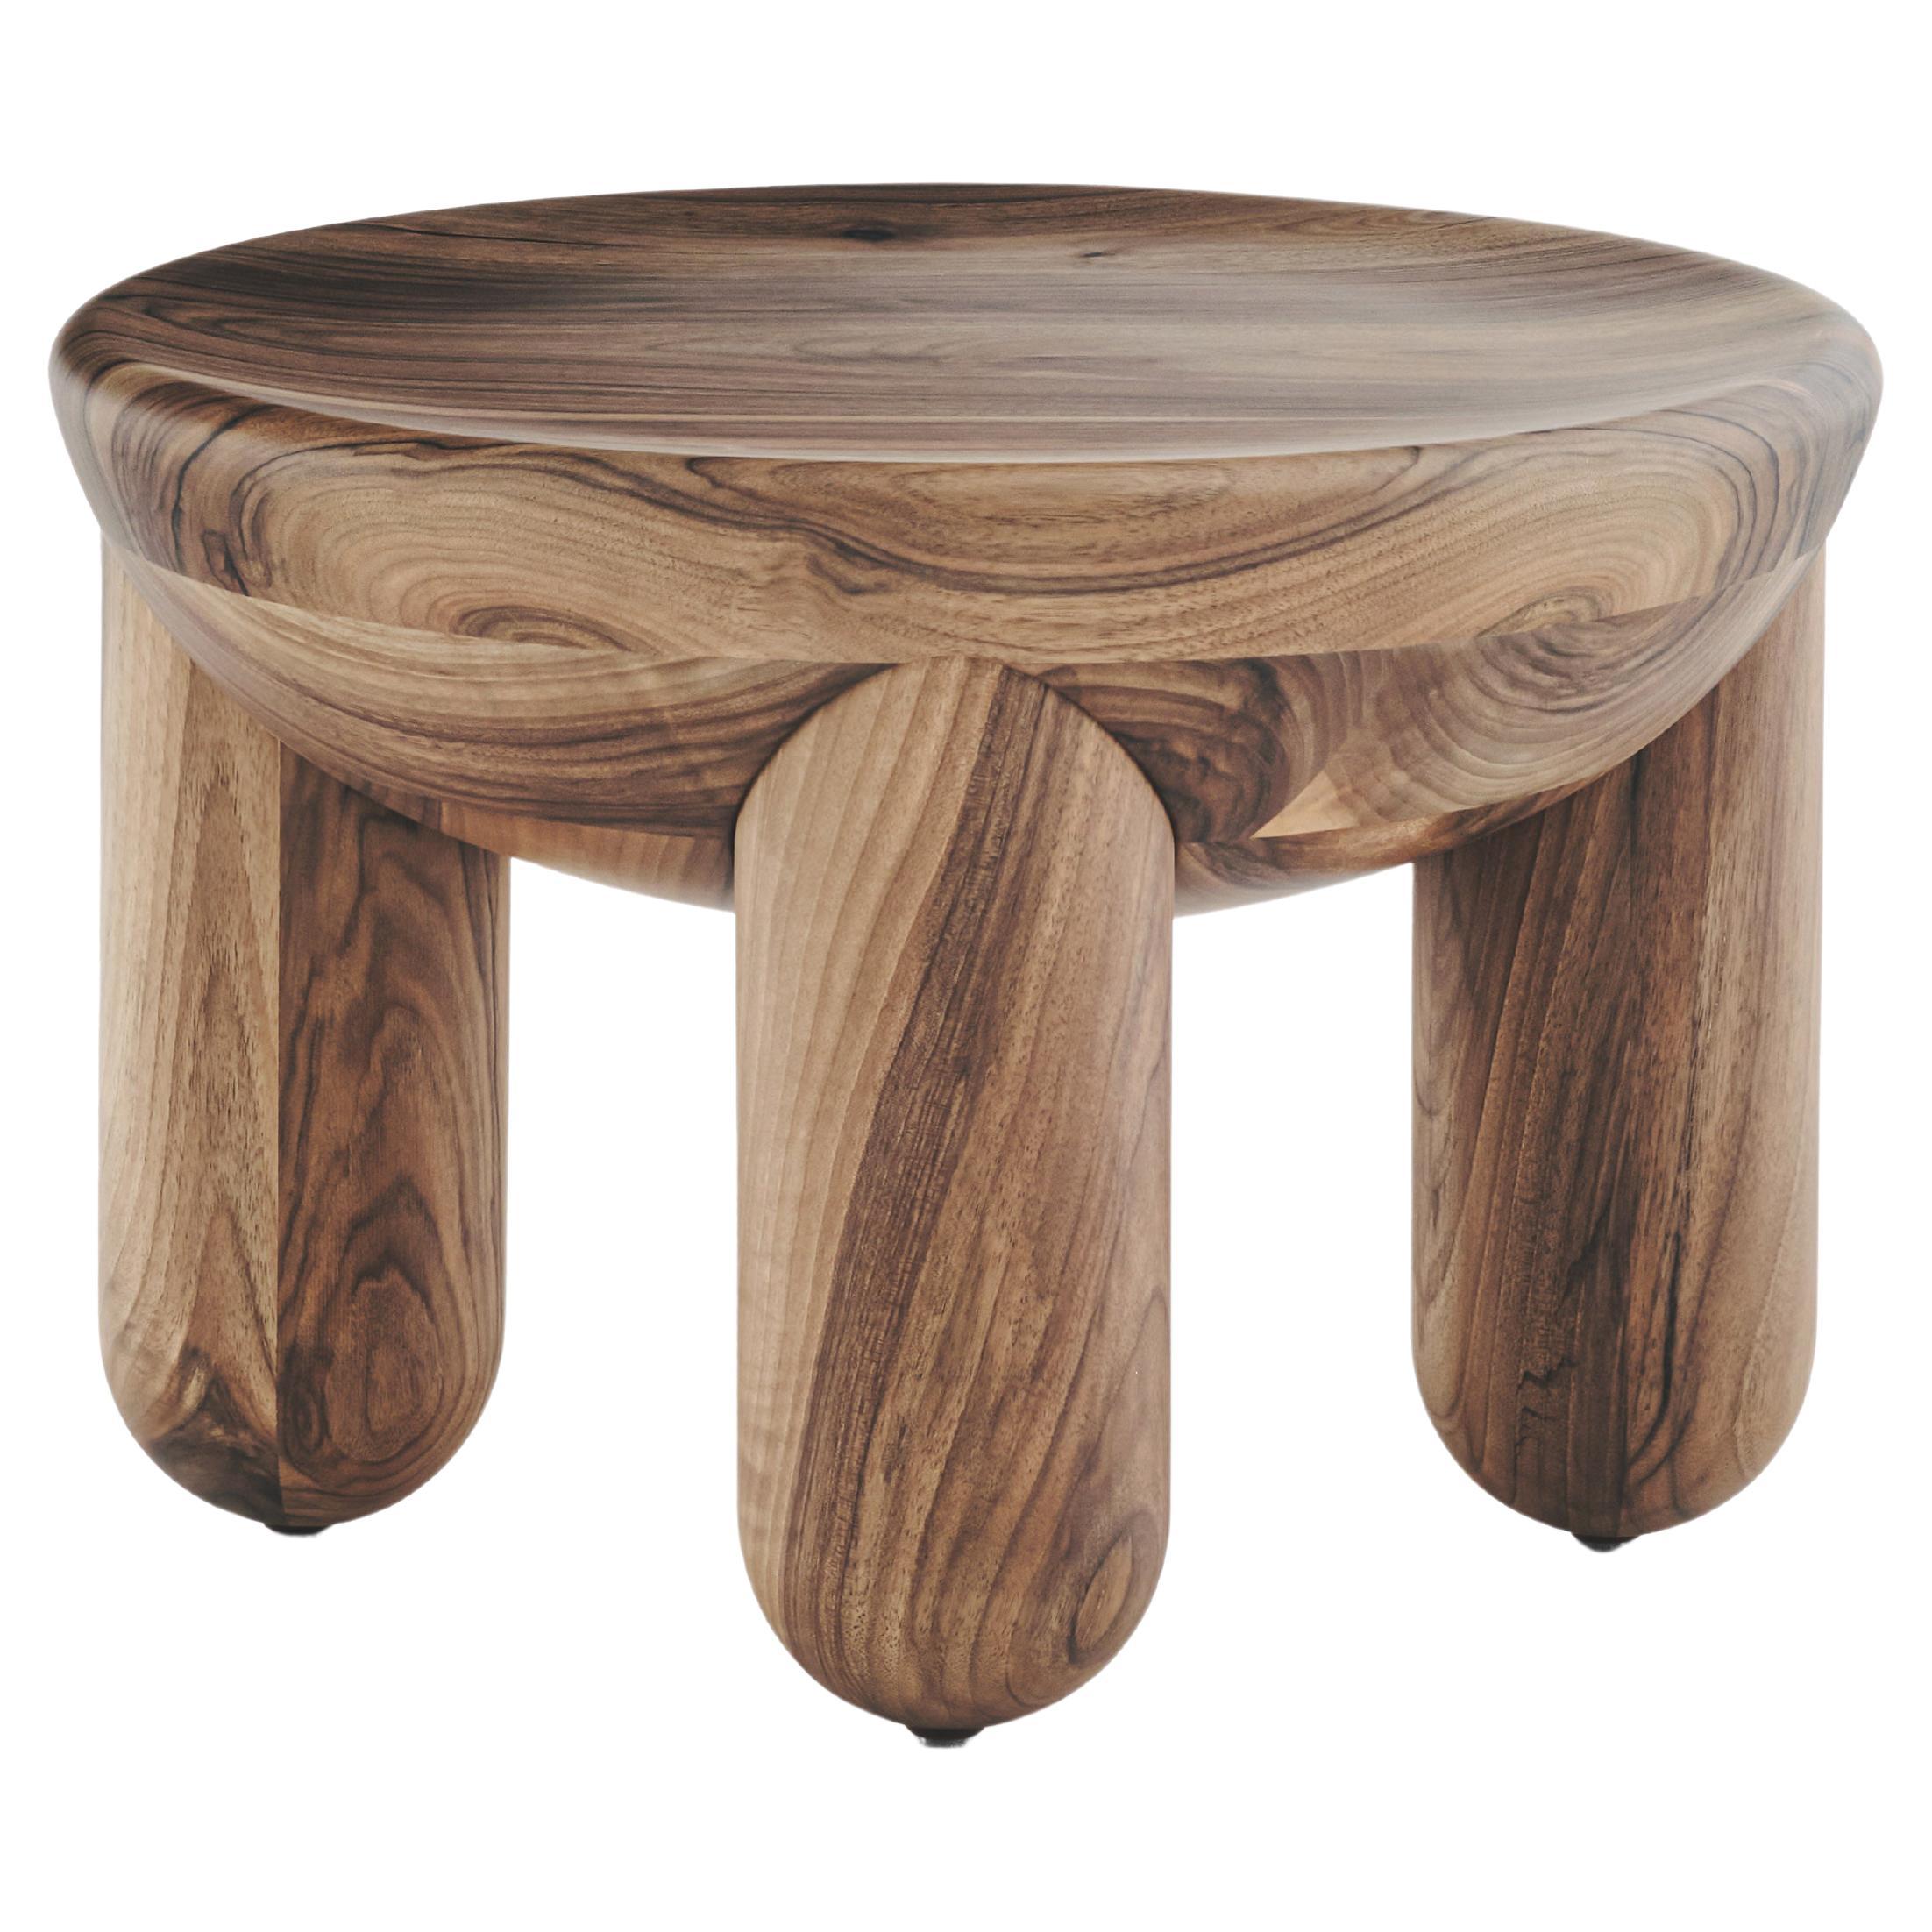 Contemporary Coffee or Side Table 'Freyja 1' by Noom, Walnut